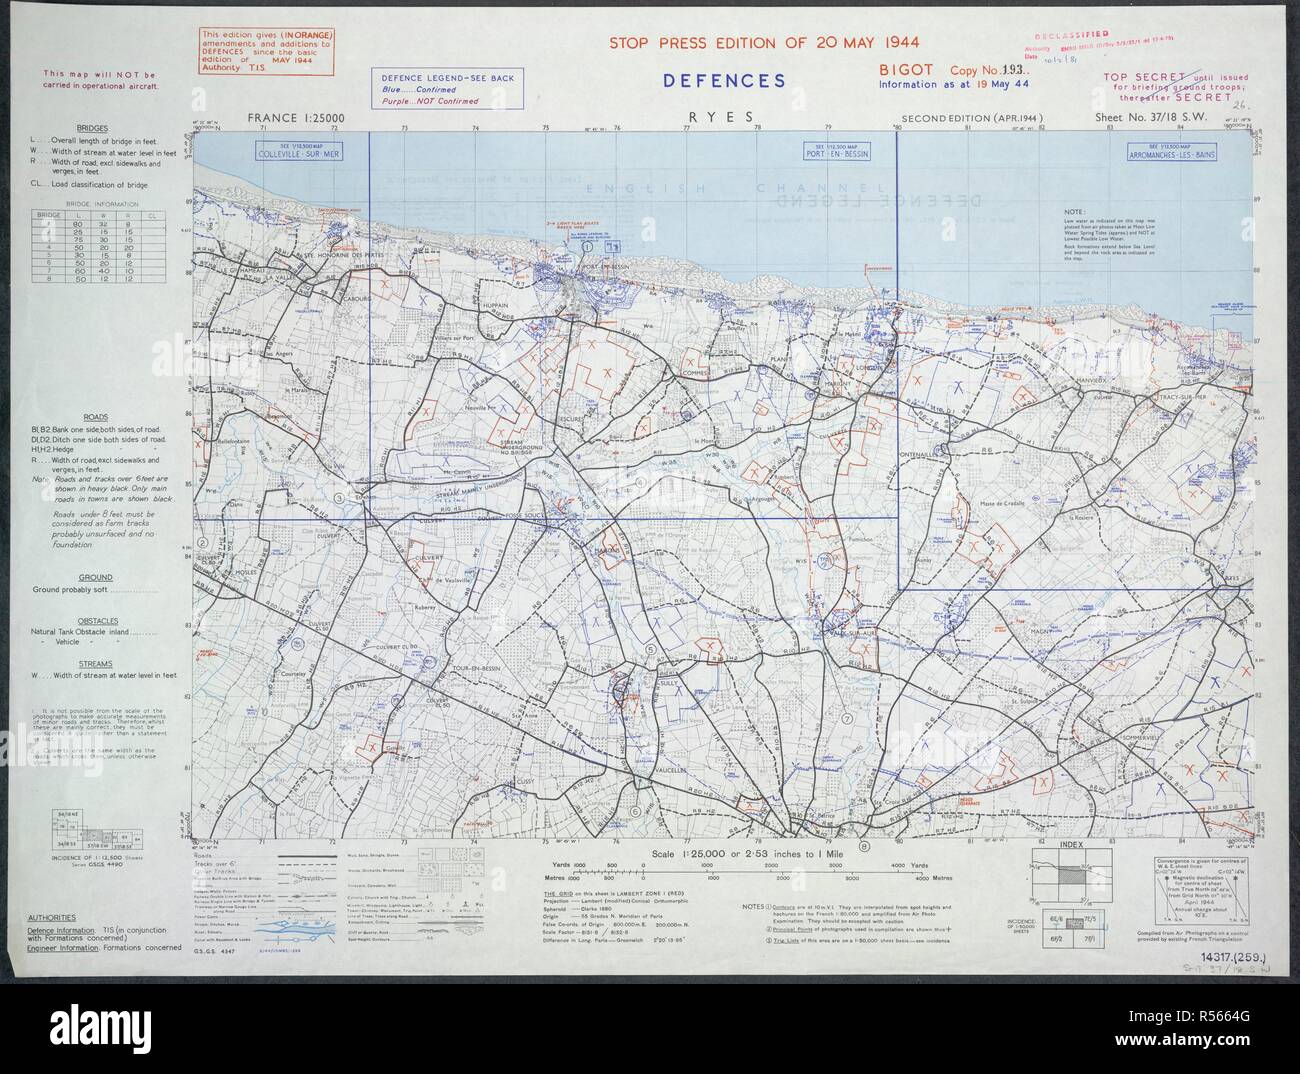 Ryes, France. Gold beach. A map of the Second World War. France 1:25,000 Defences, Bigot. [London] : War Office, 1944. Source: Maps 14317.(259.) 37-18 SW. Stock Photo